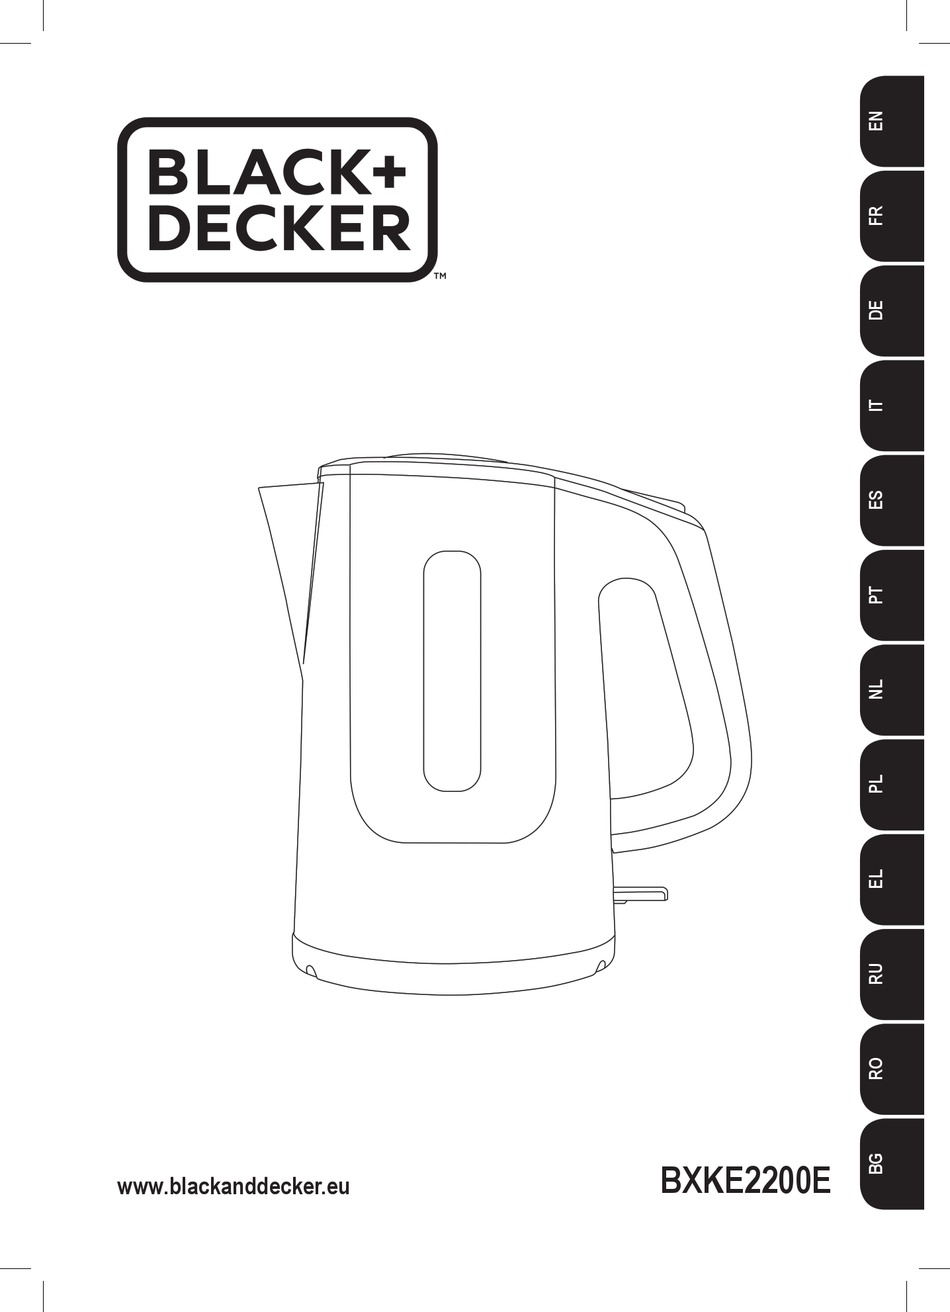 User manual Black & Decker DC1005 (English - 16 pages)